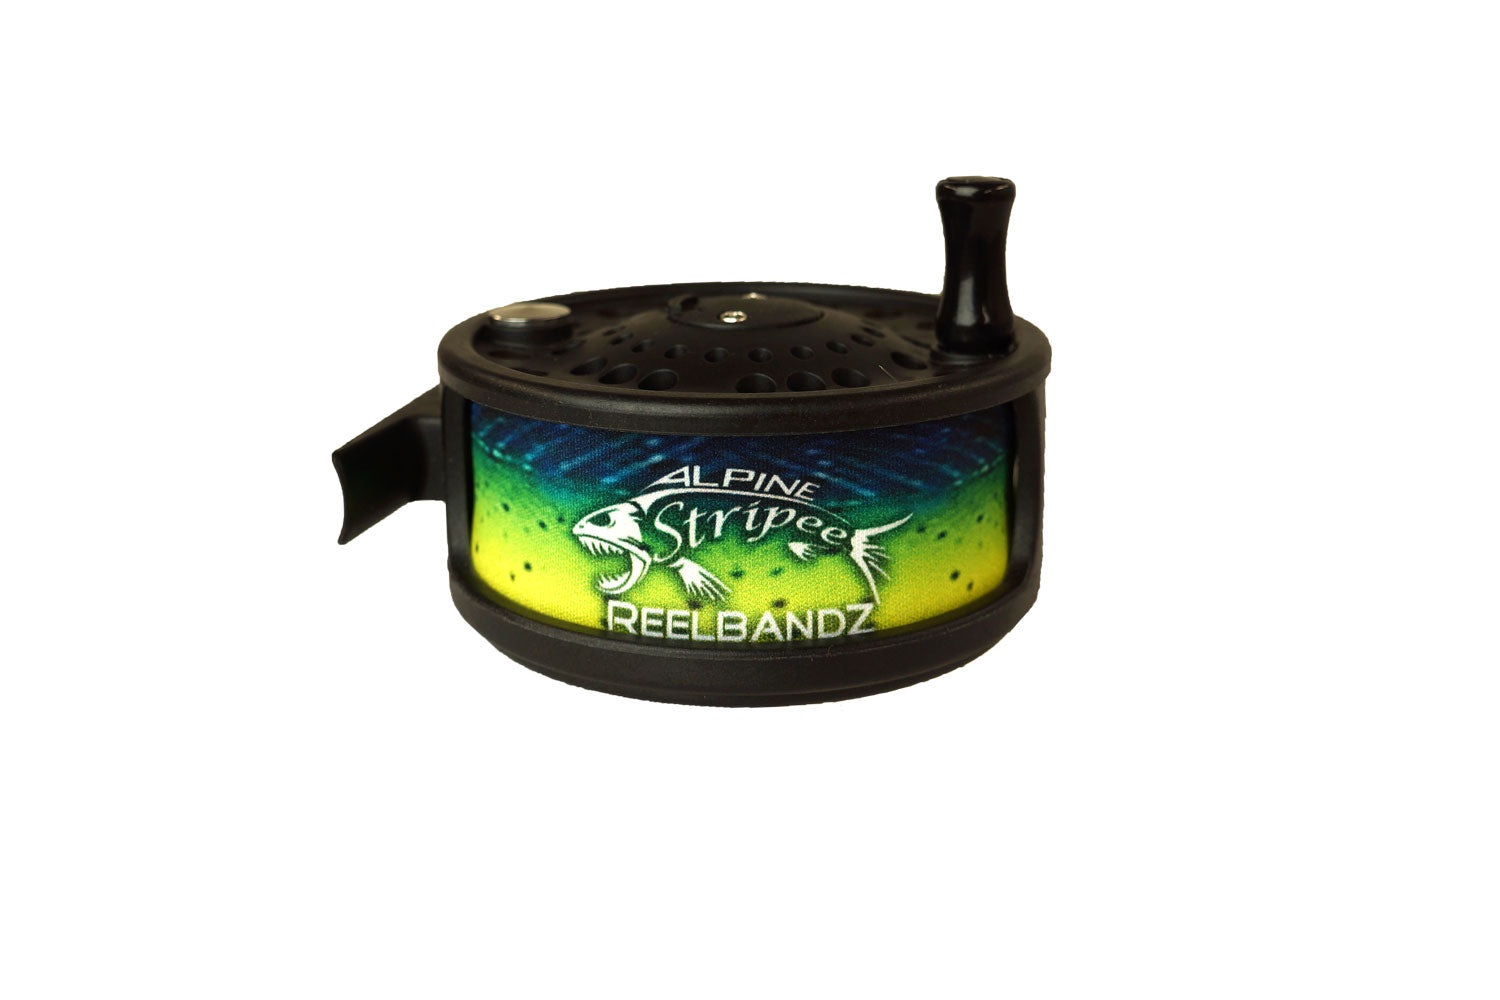  Pro-Strike The Spool Bands (Set of 5) Fishing line Spool  Control Band, fits Over Most Spool Sizes! : Sports & Outdoors